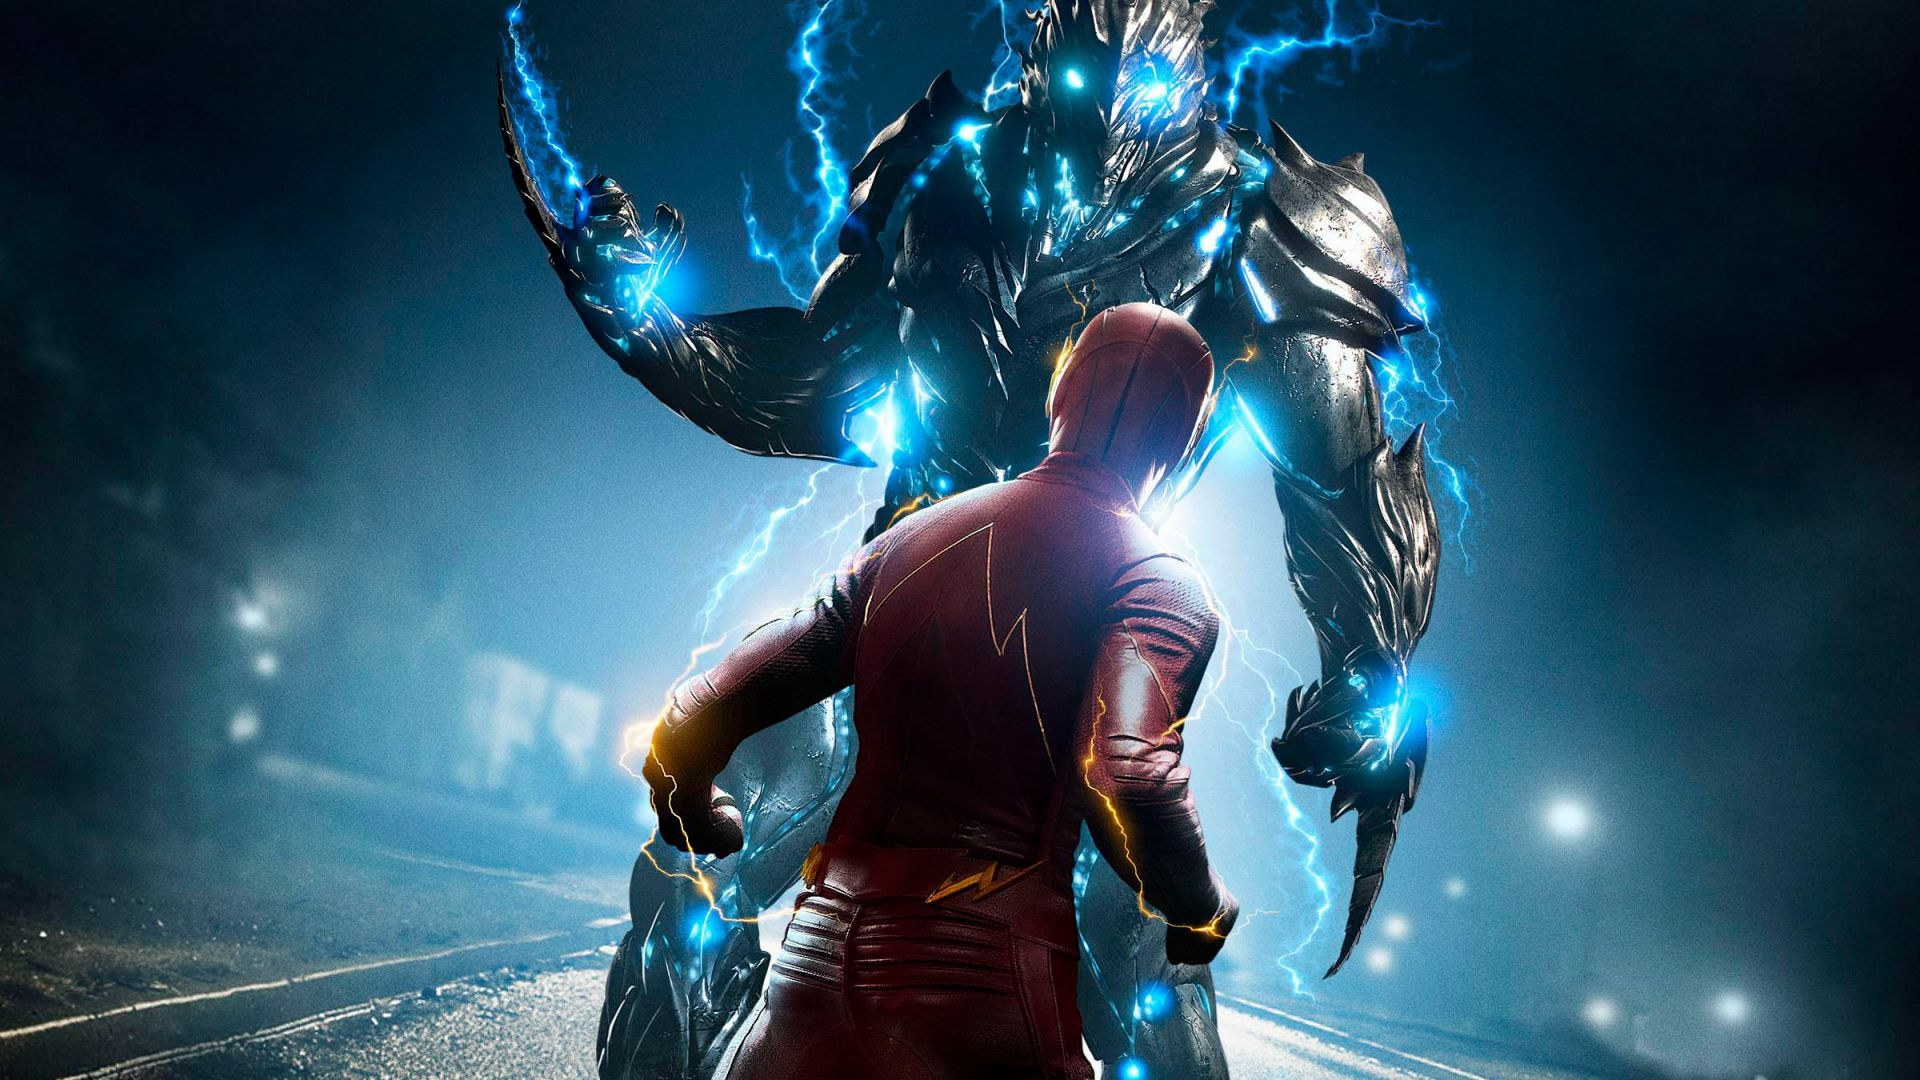 1920x1080 Desktop Wallpaper The Once And Future Flash, The Flash, Tv Show, Savitar, 2017, Hd Image, Picture, Background, Sd4xtj